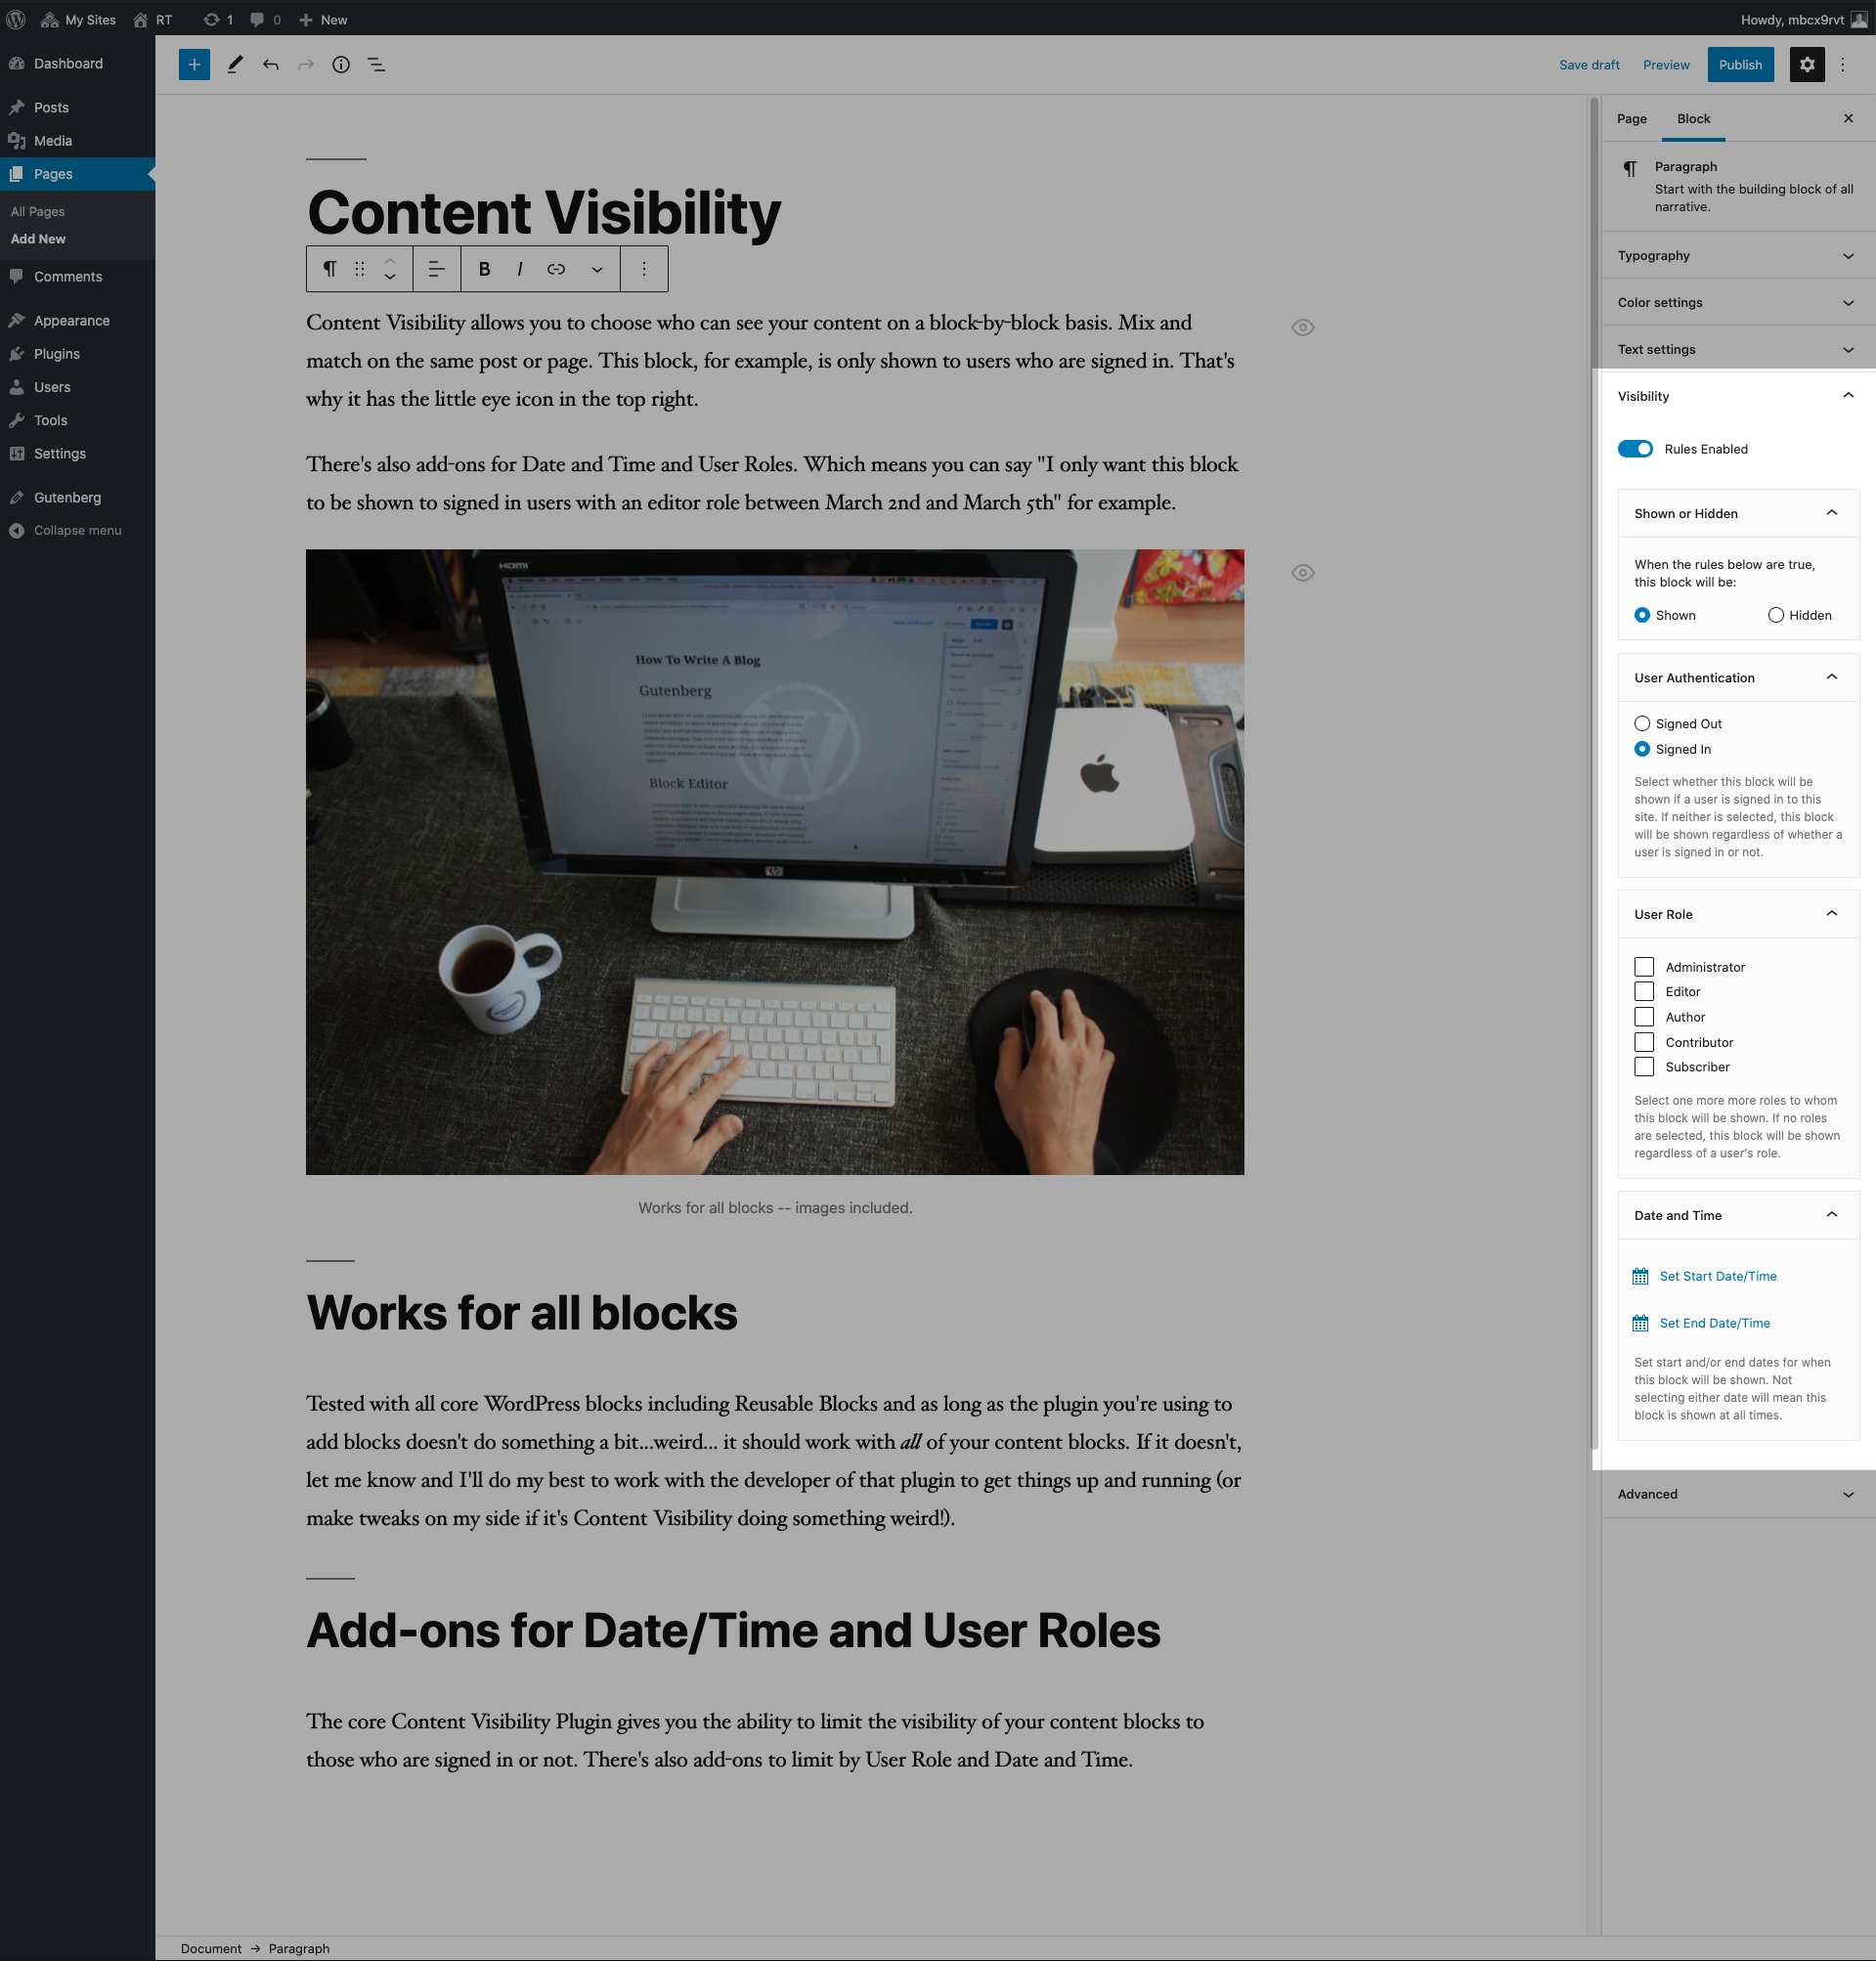 Screenshot showing content visibility controls including the icon which allows content authors to see which of their blocks have content visibility rules in place